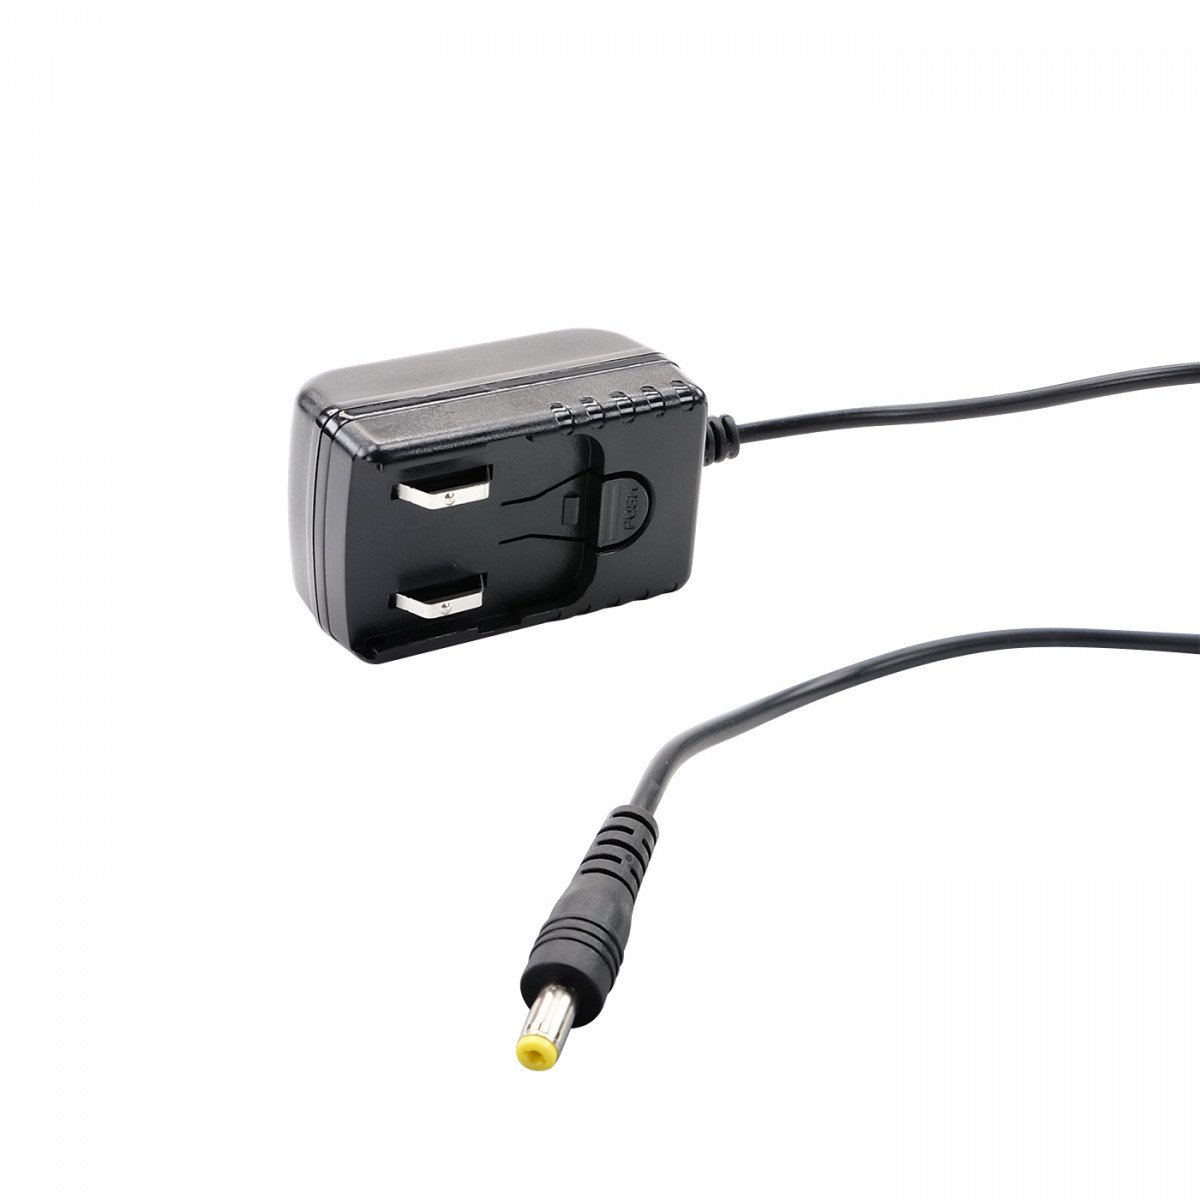 SEPURA single charger, 230V, for device with battery or single battery for Sepura STP8X 41800518